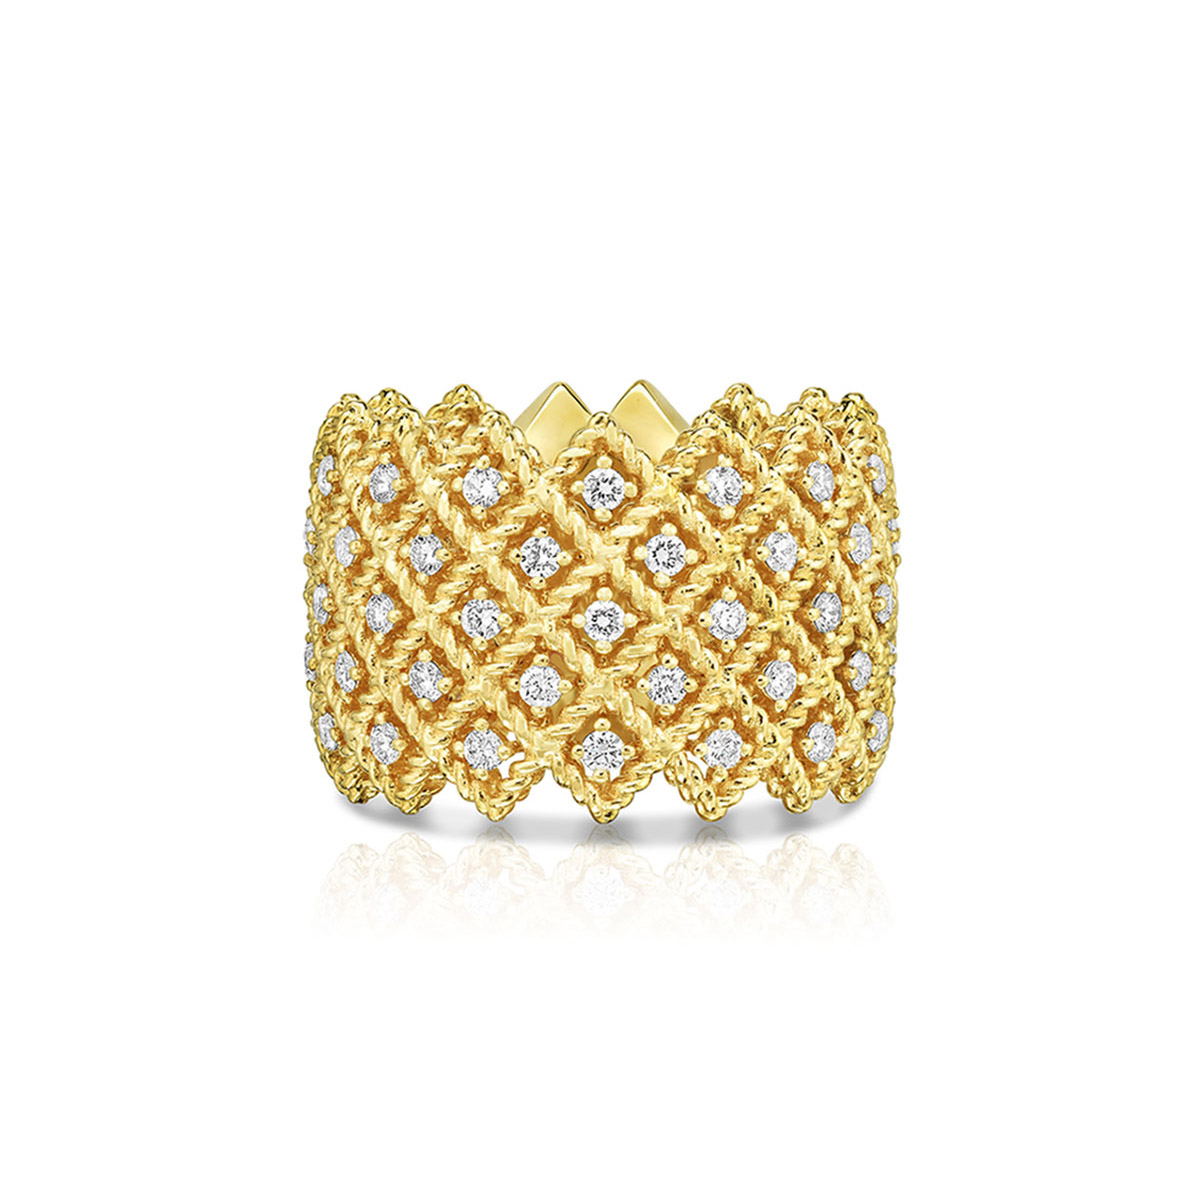 Wholesale Offering custom OEM/ODM Jewelry Five-Row Ring with Diamonds in 18K Yellow Gold design jewelry